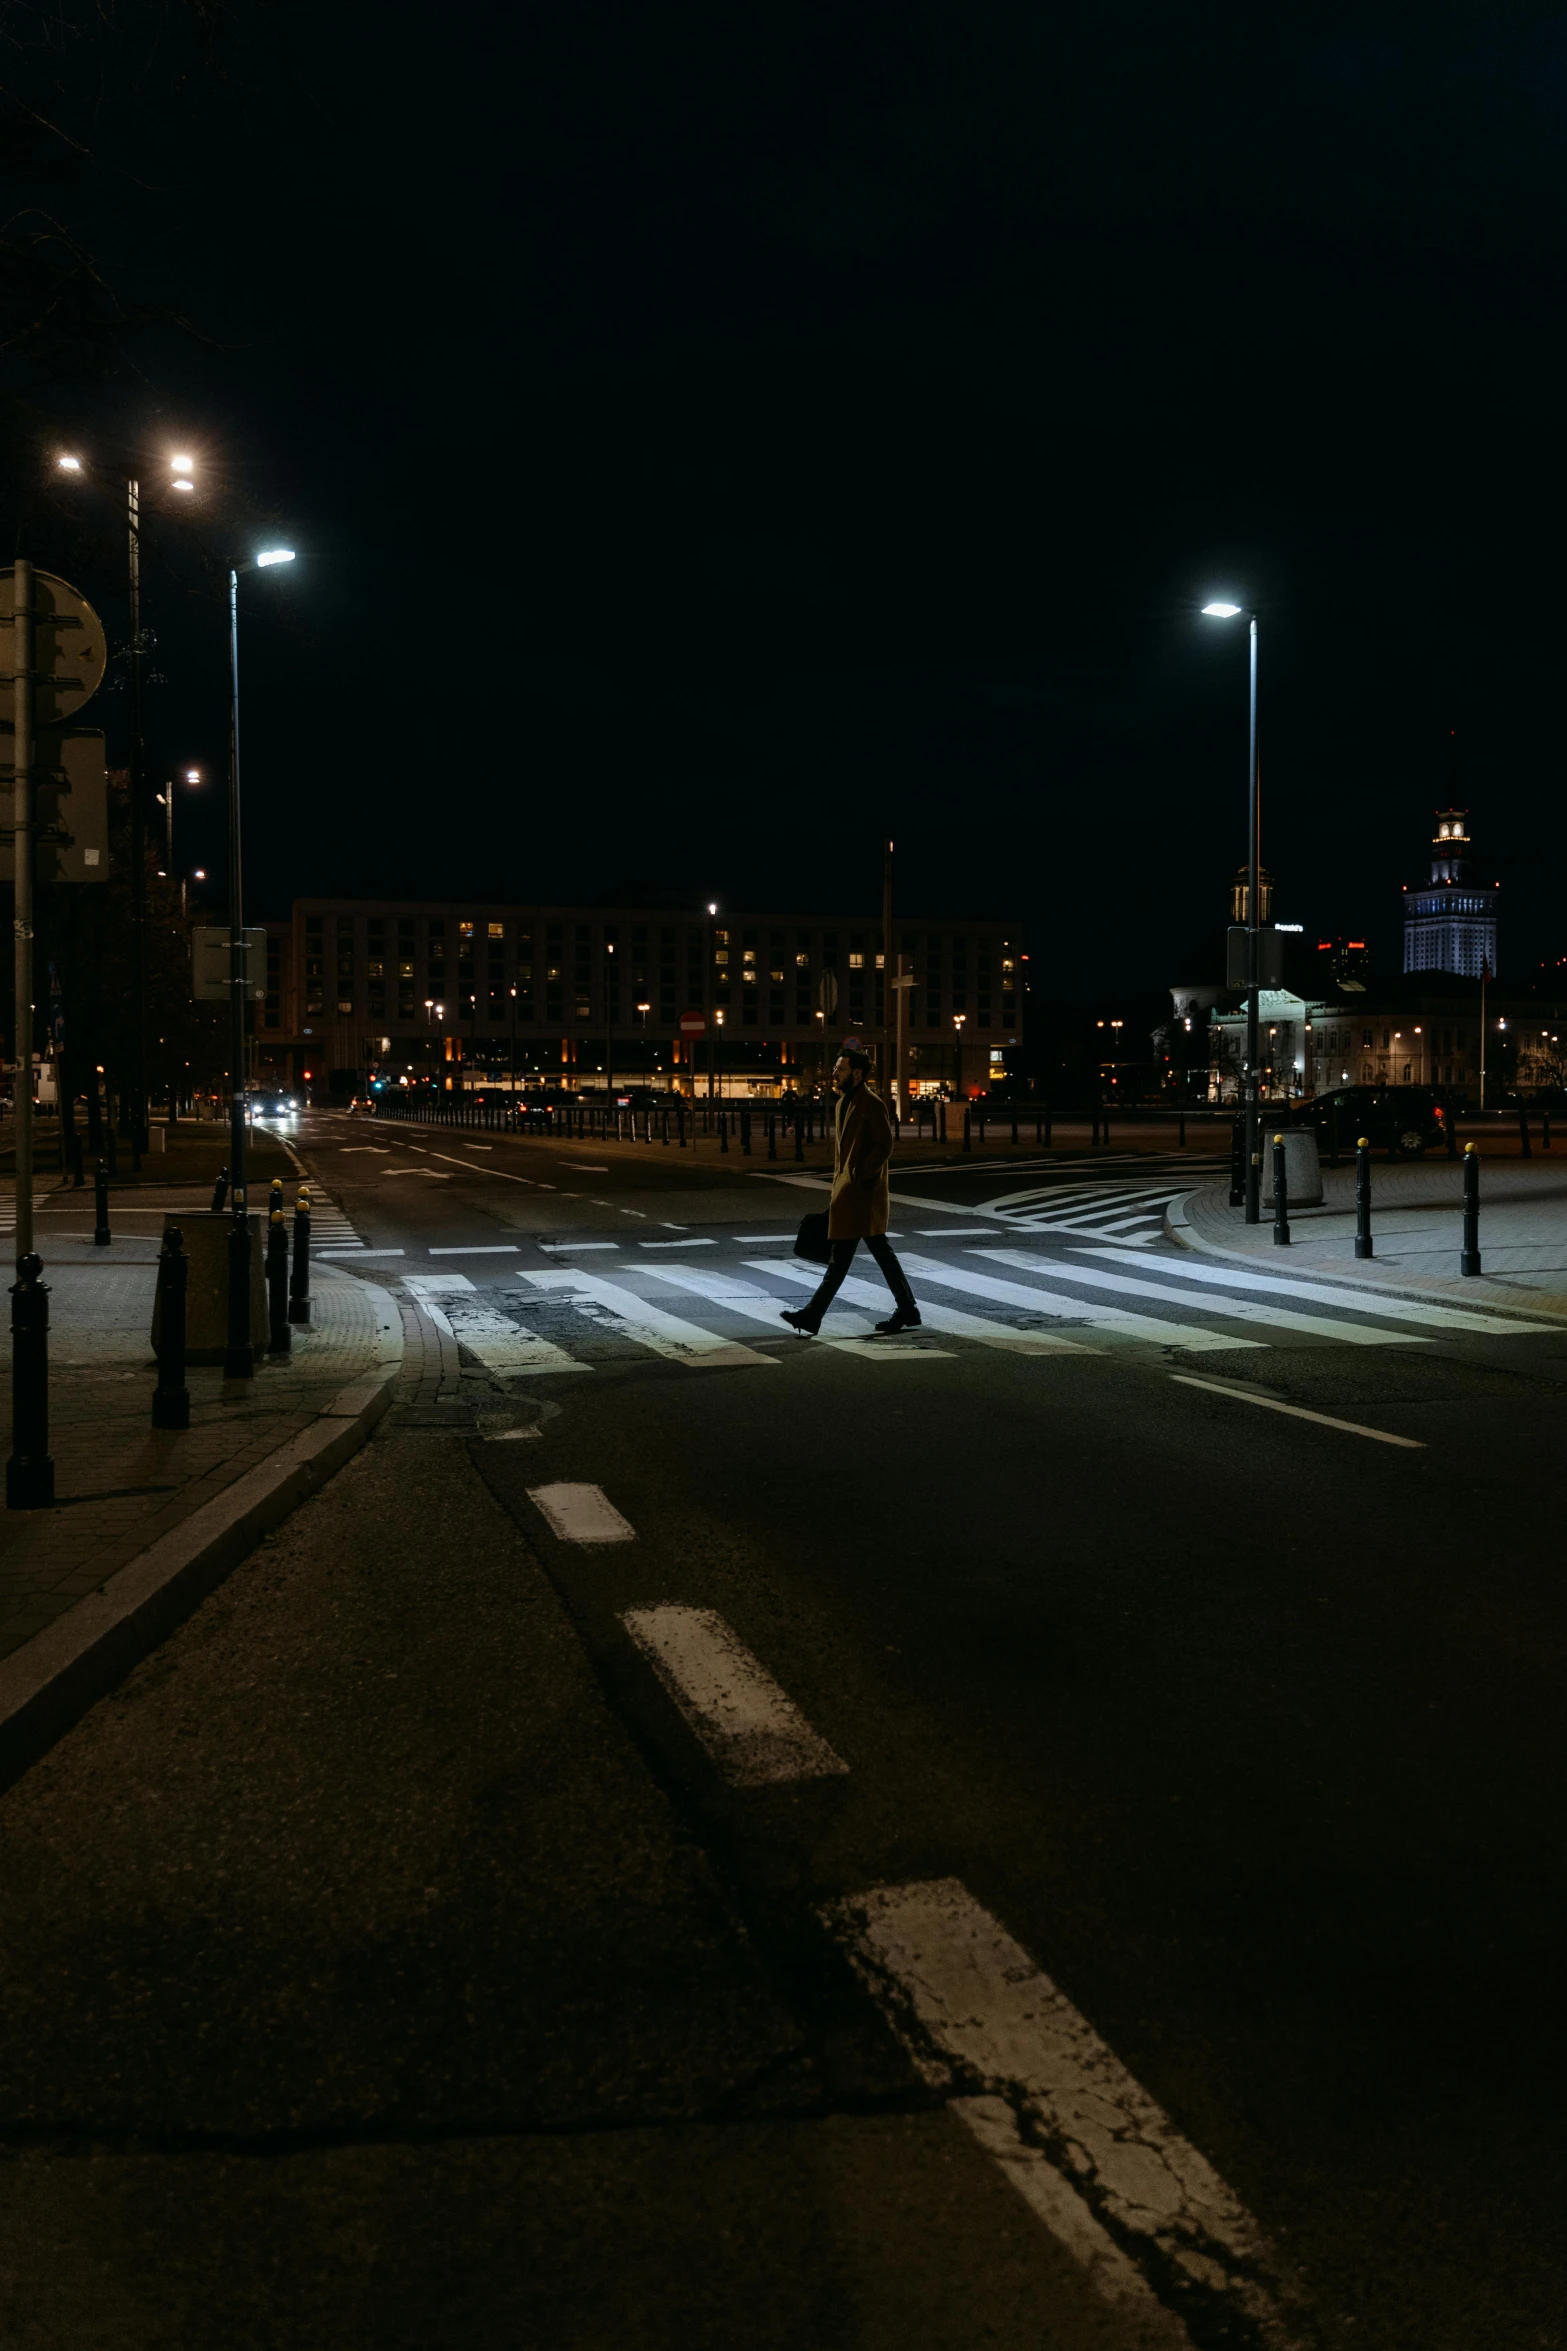 a person walking across a street at night, by Tobias Stimmer, pexels contest winner, happening, espoo, intersection, harsh light, deserted